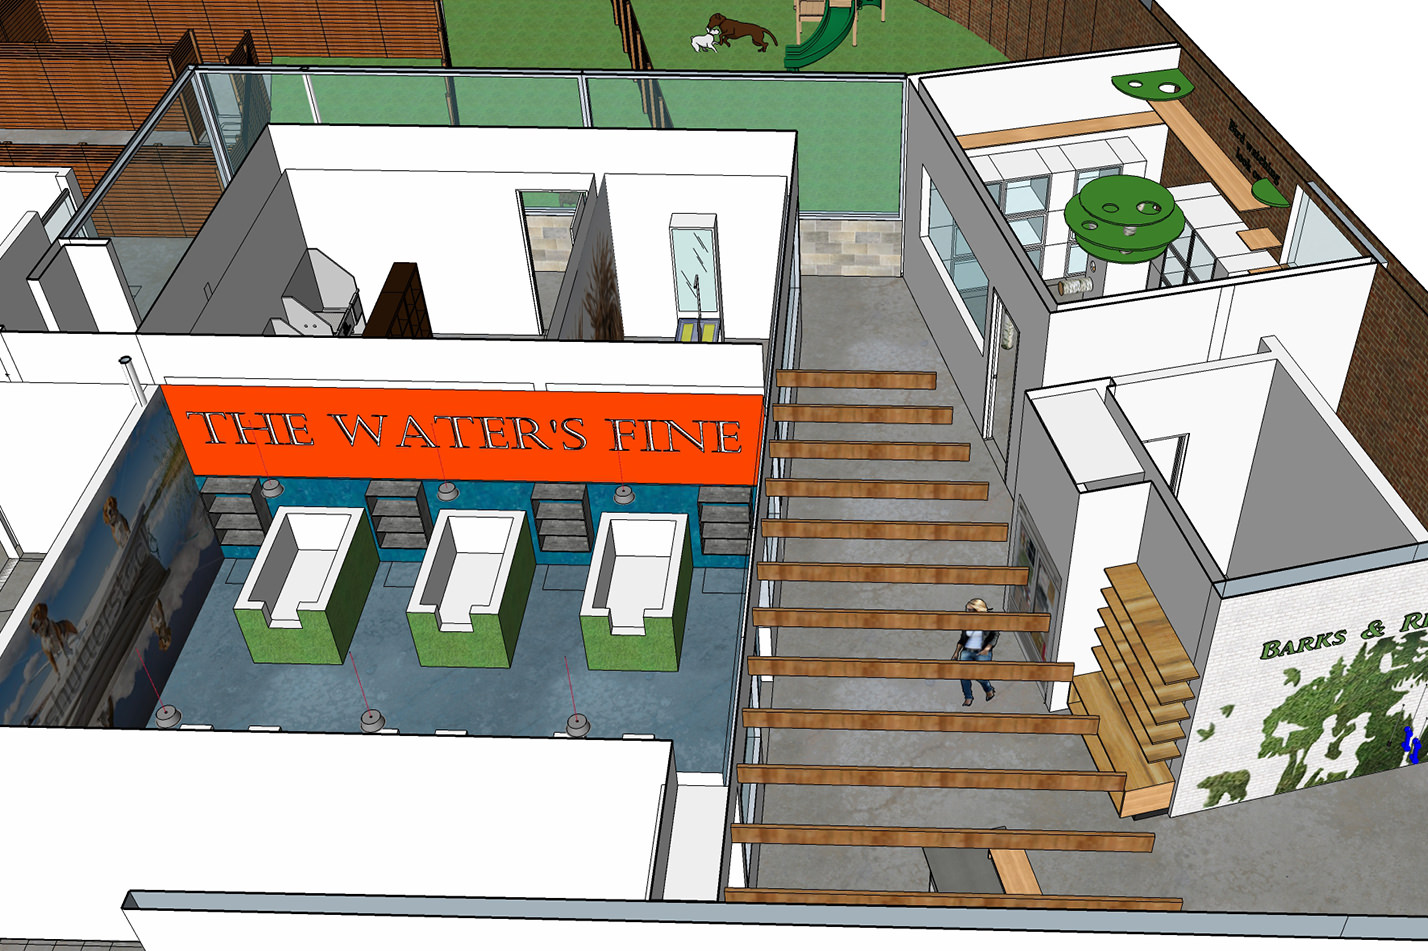 Space planning and graphics in SketchUp model designed by creative interior design firm